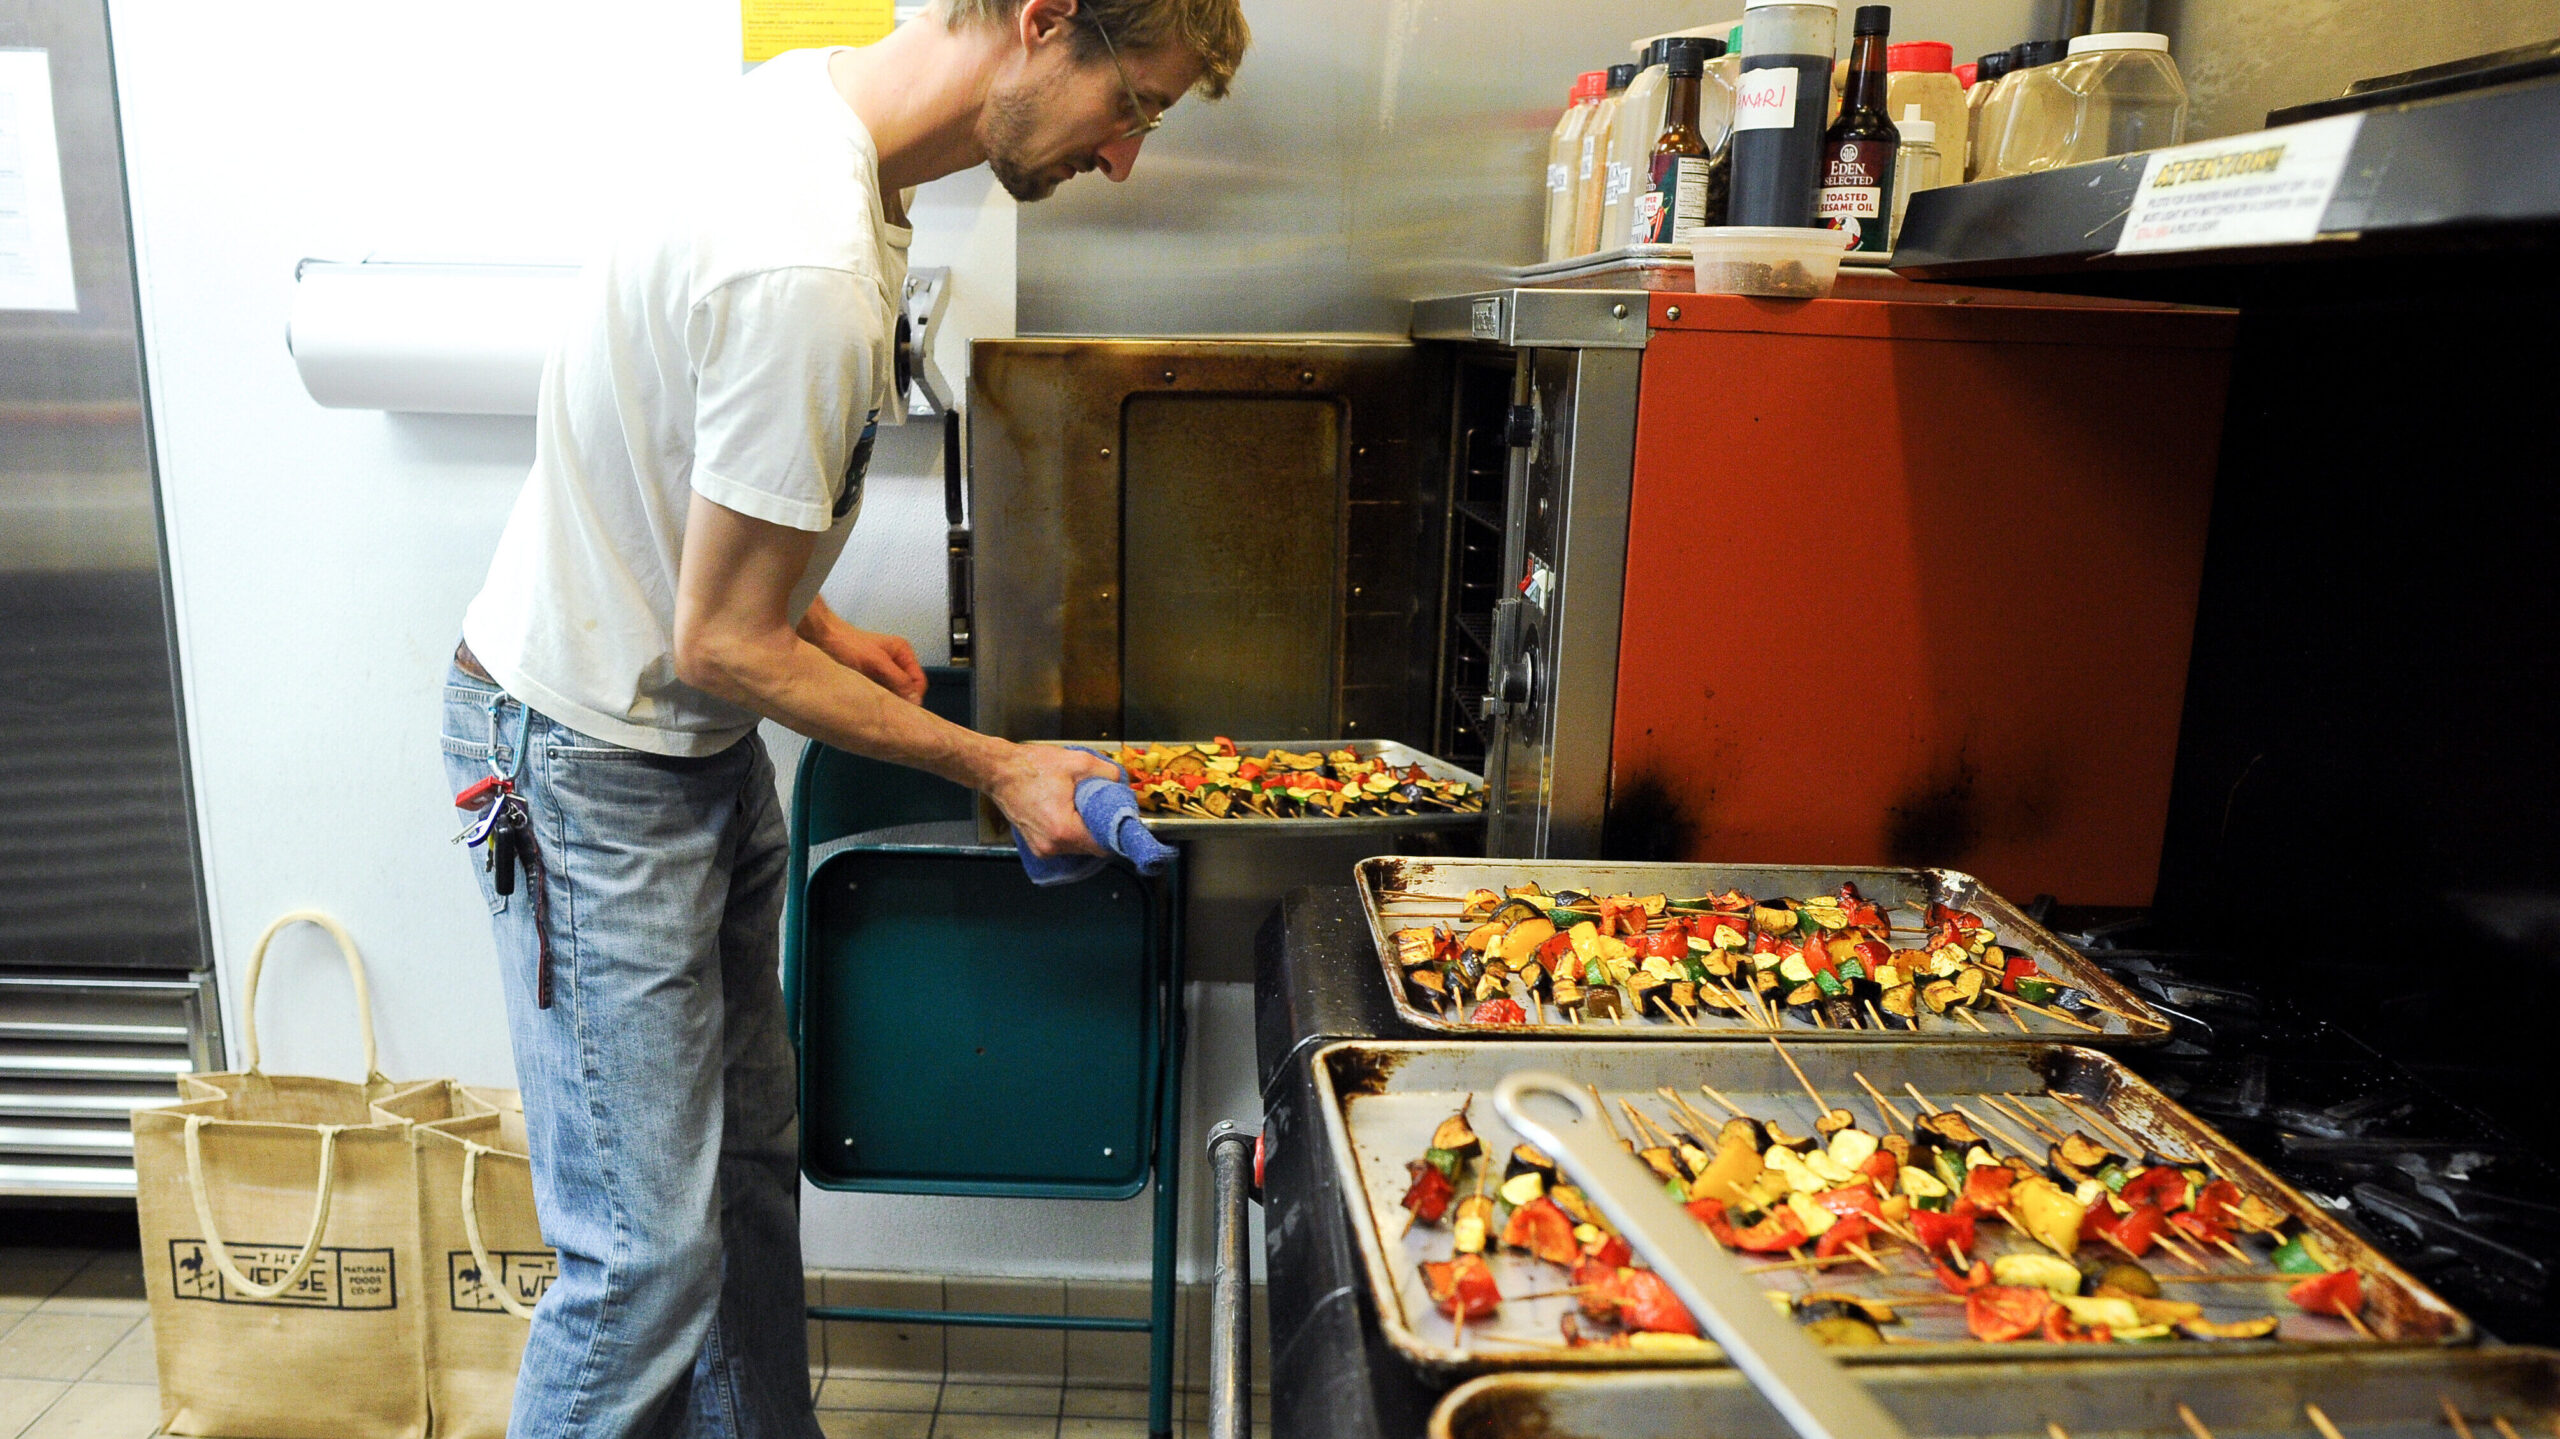 Nick Schneider prepares roasted vegetable skewers for The Return of King Idomeneo: A Picnic Operetta, 2012